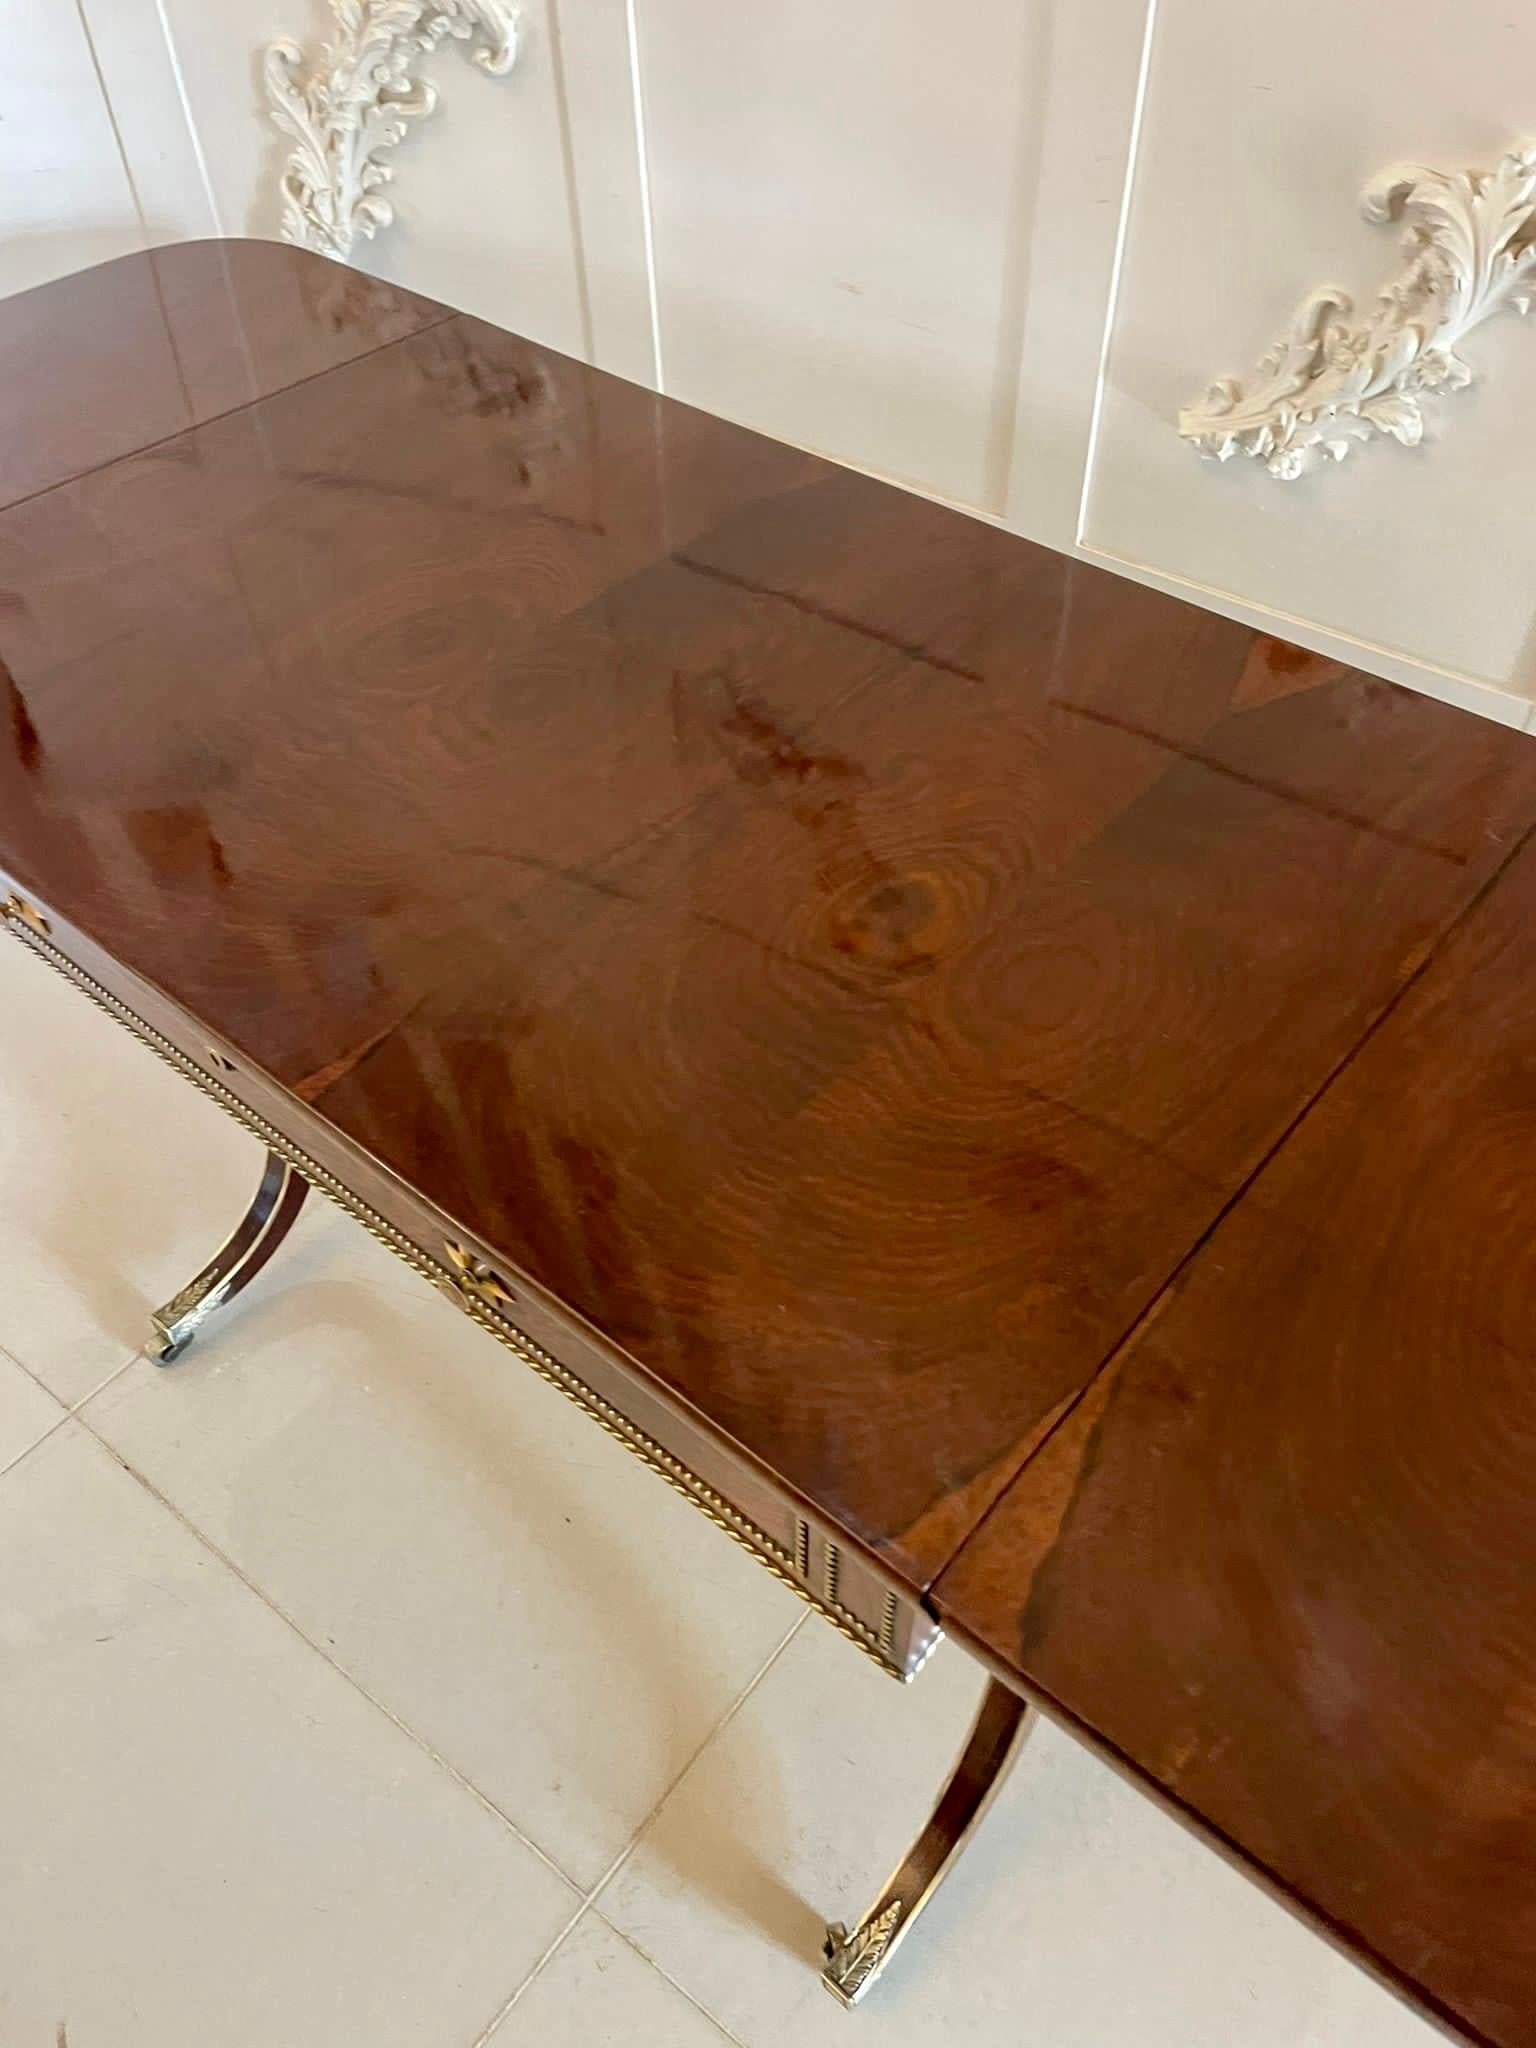 Fine Quality Antique Regency Brass Inlaid Rosewood Freestanding Sofa/Side Table In Good Condition For Sale In Suffolk, GB